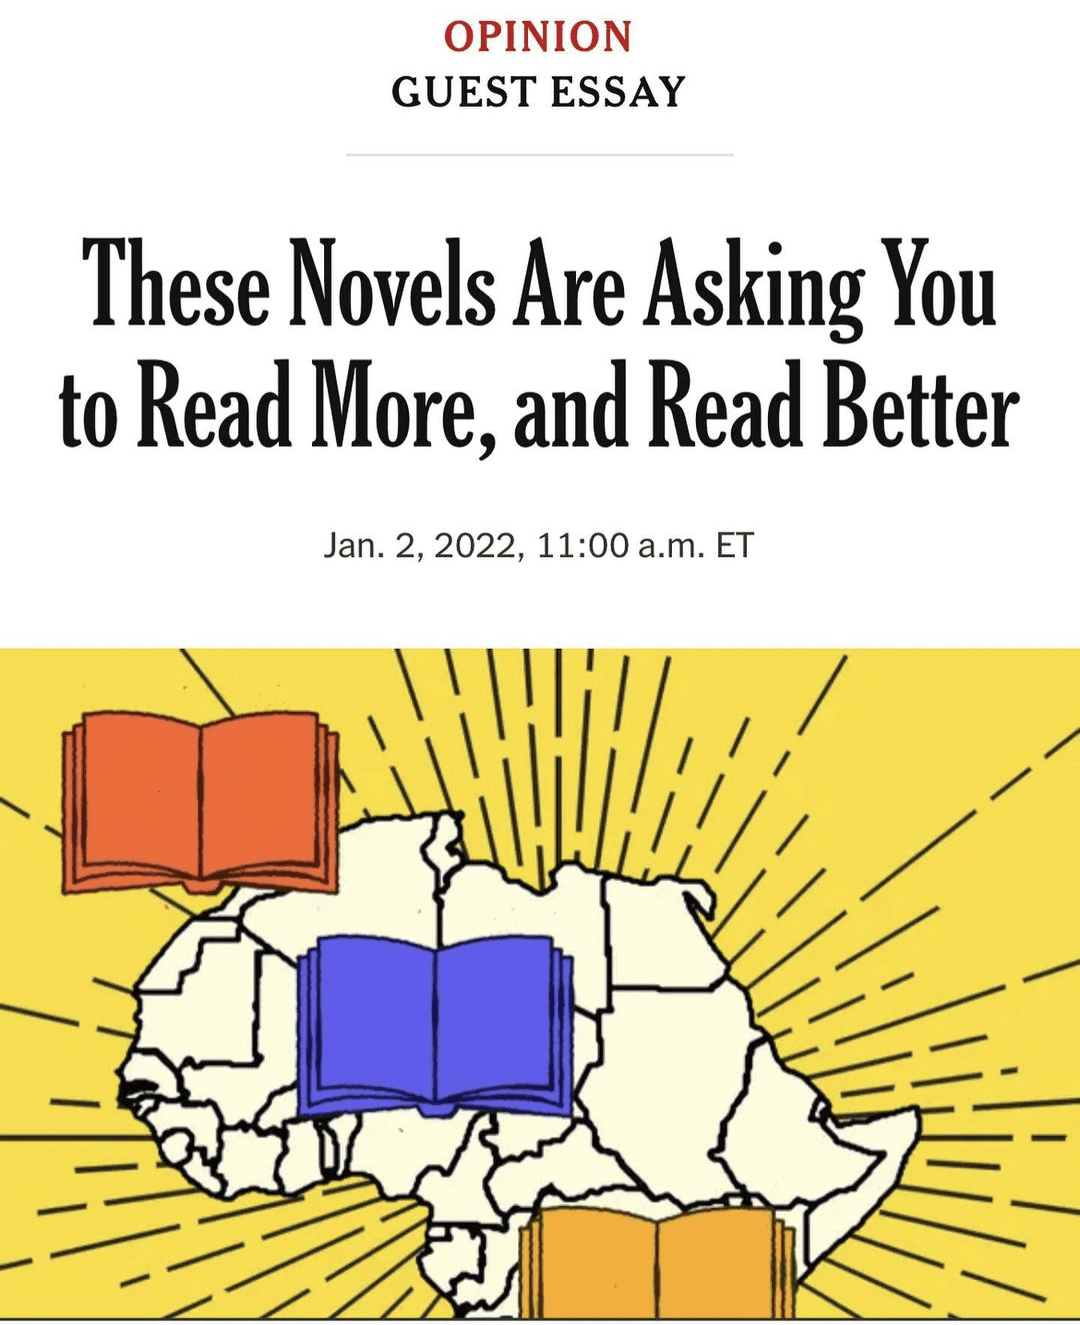 These Novels Are Asking You to Read More, and Read Better